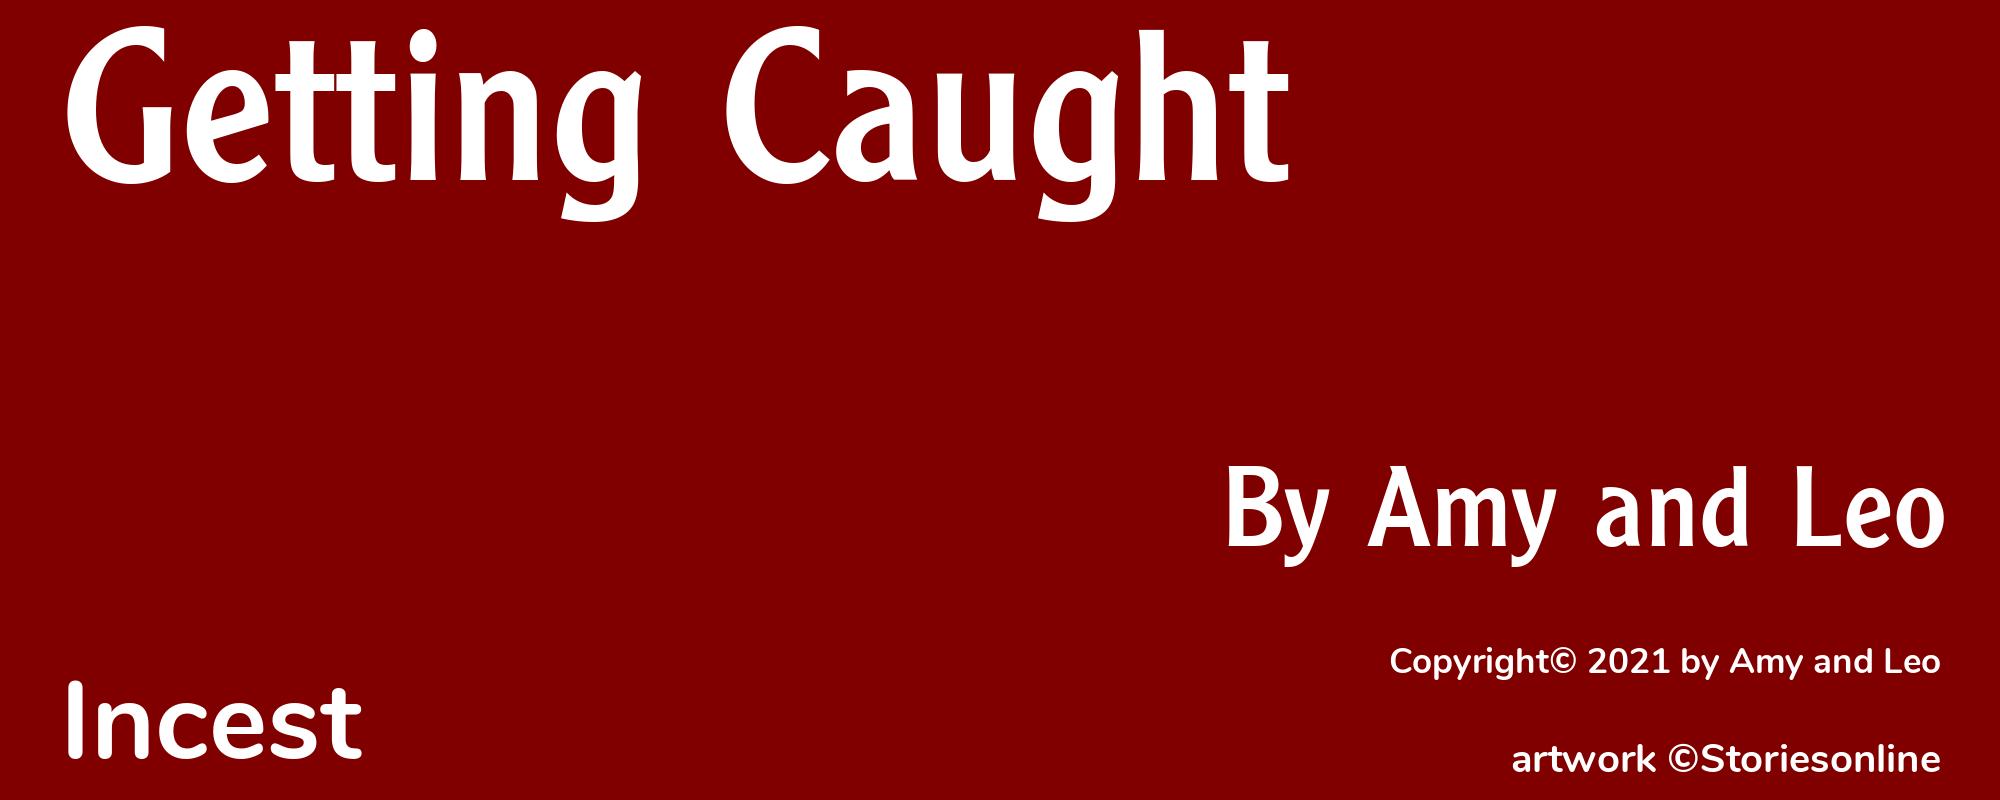 Getting Caught - Cover